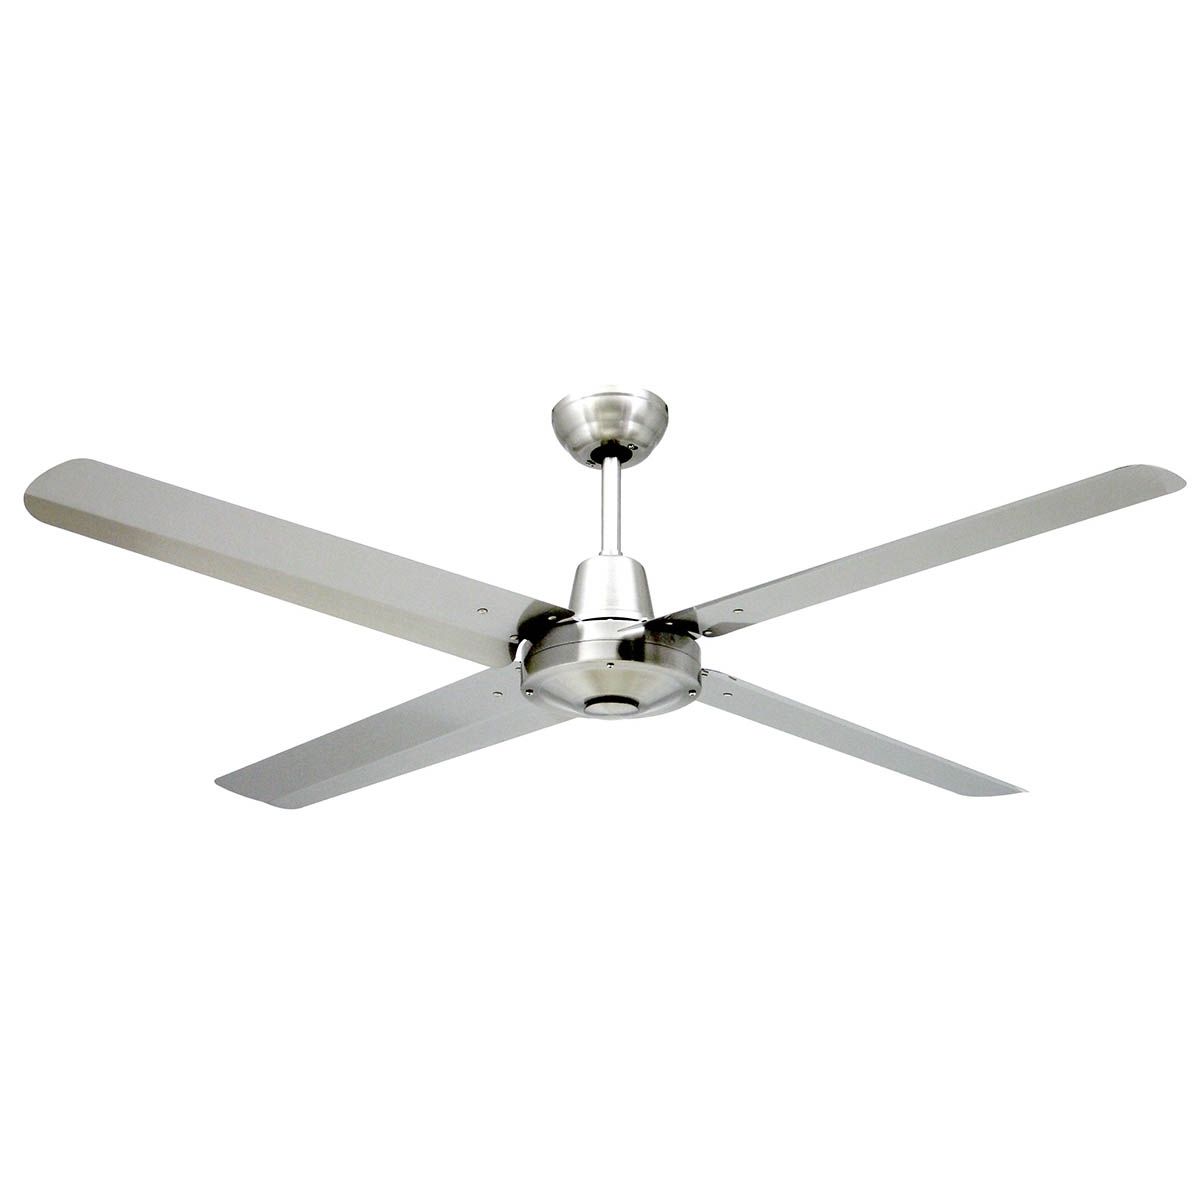 Warisan In Newest Stainless Steel Outdoor Ceiling Fans With Light (View 12 of 20)